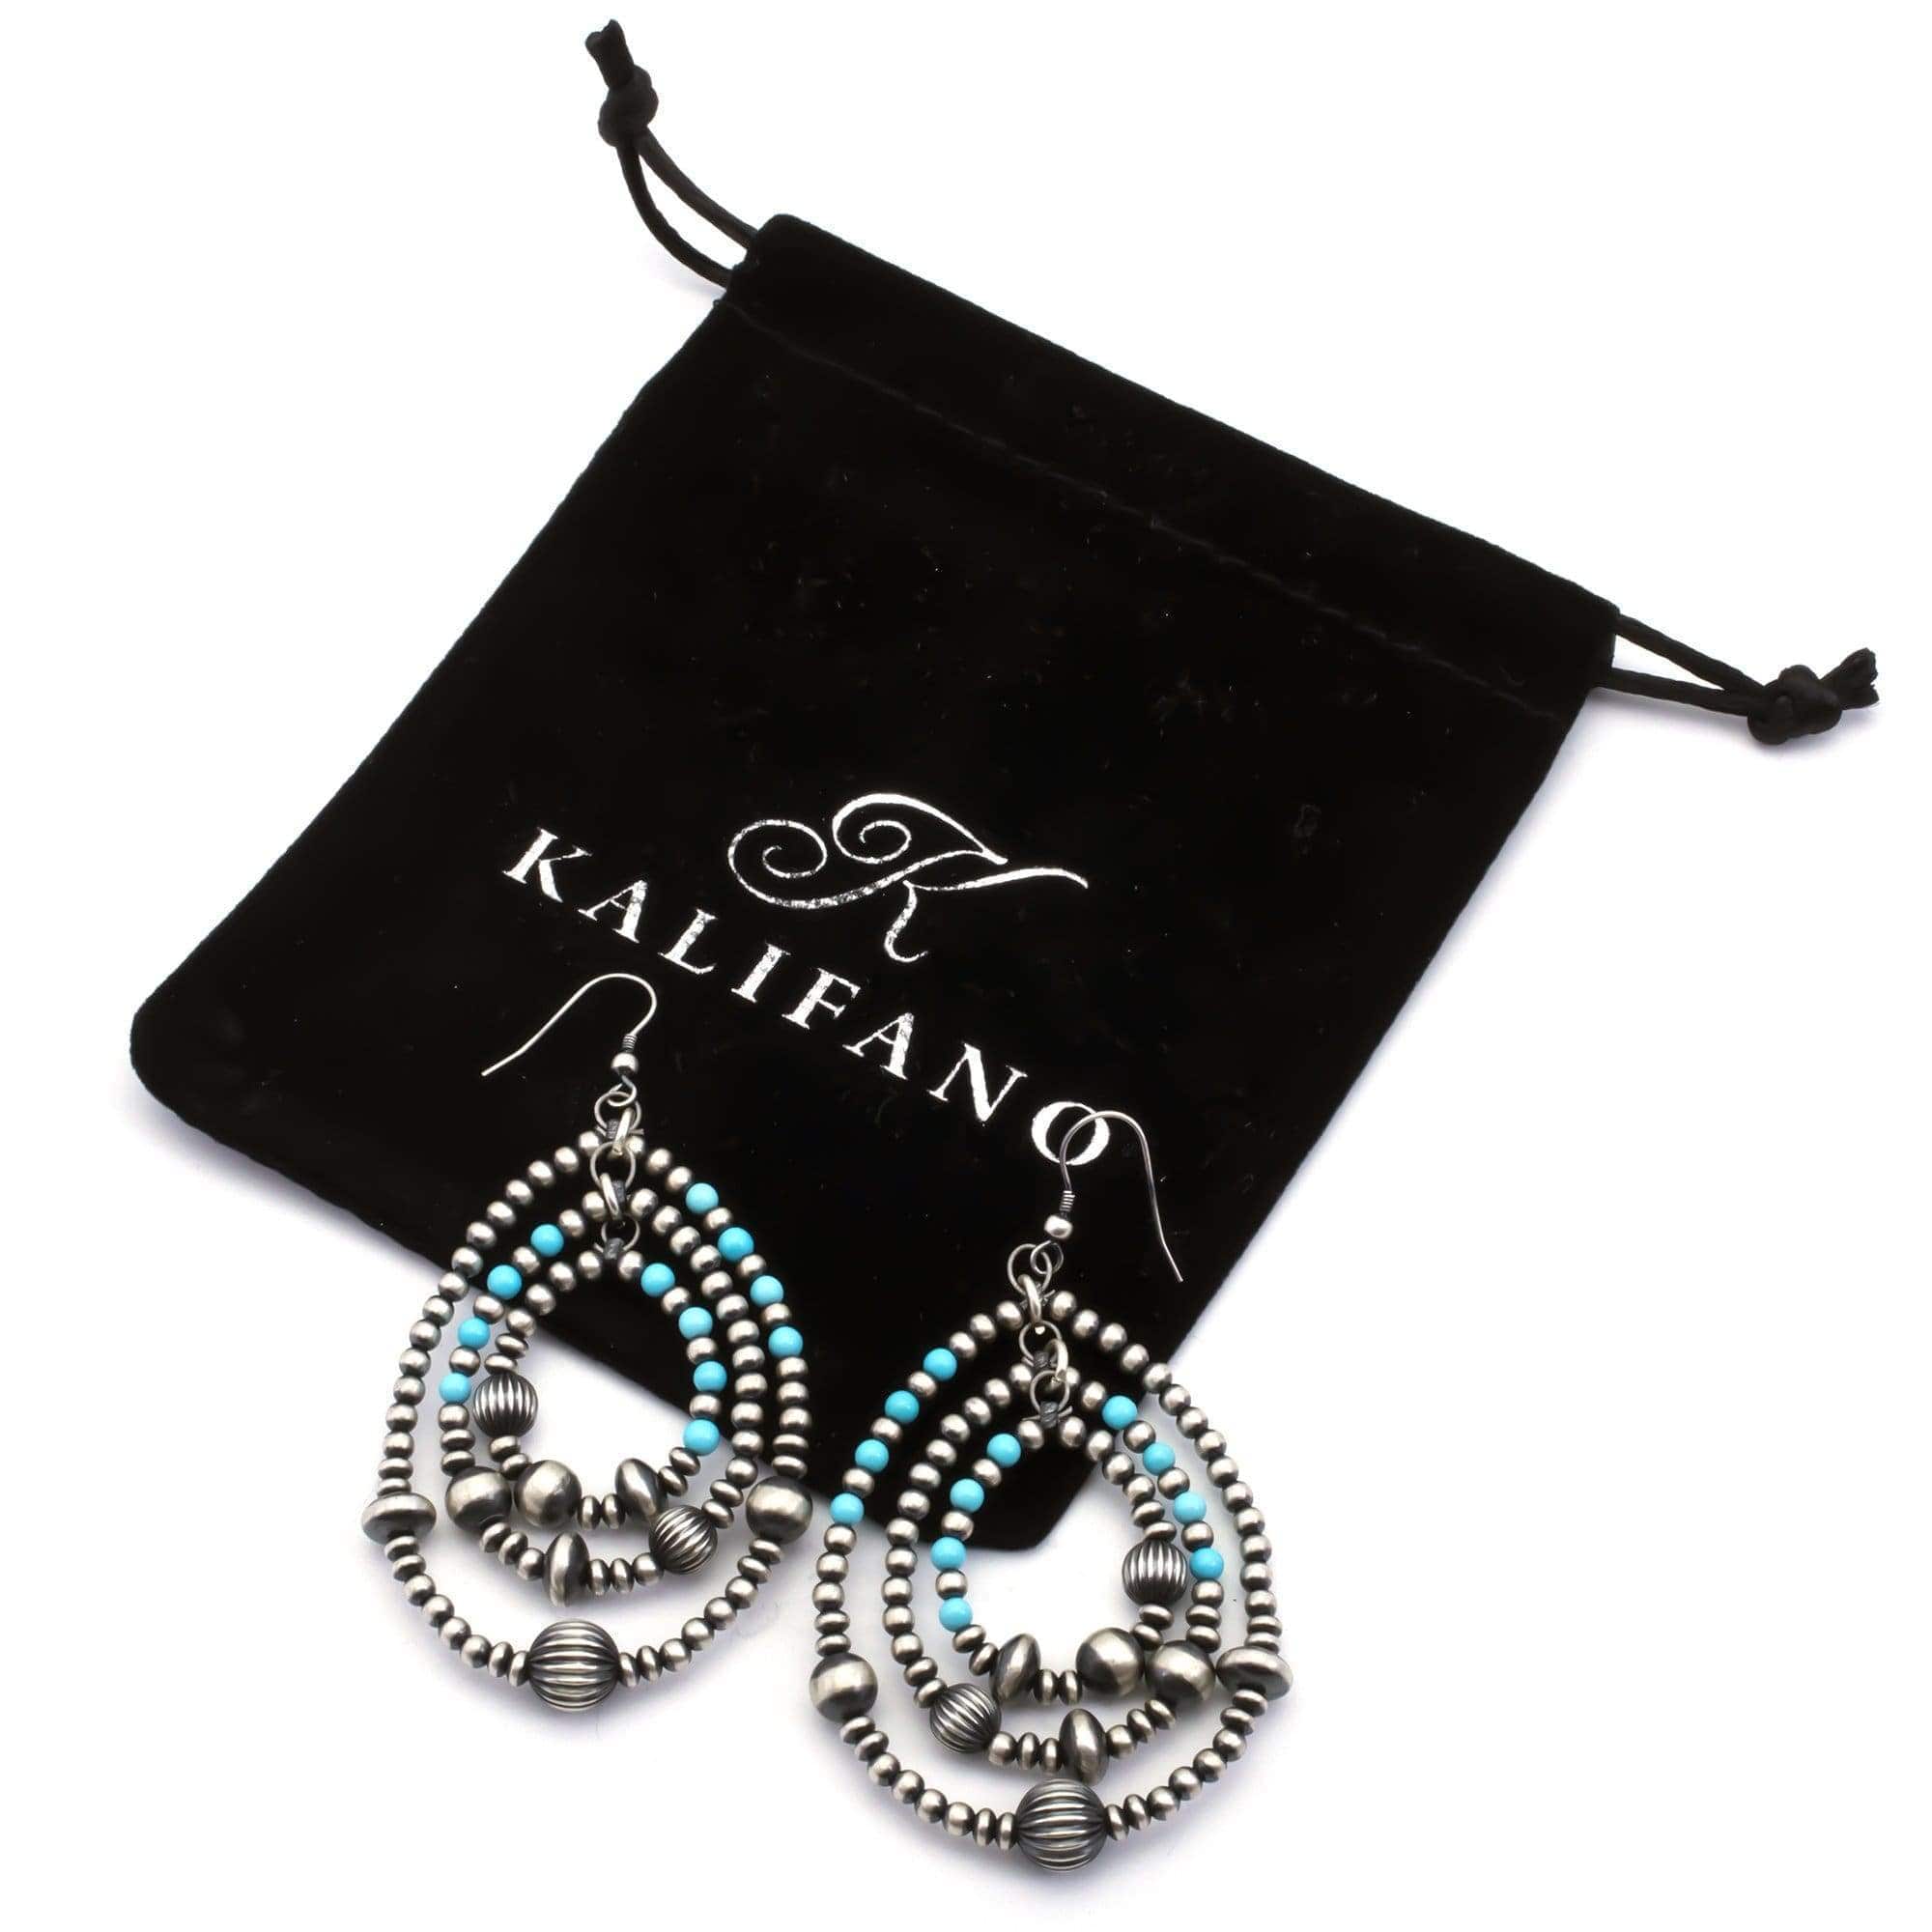 Kalifano Native American Jewelry Sleeping Beauty Turquoise USA Native American Made 925 Sterling Silver Navajo Pearl XL Chandelier Earrings NAE600.001